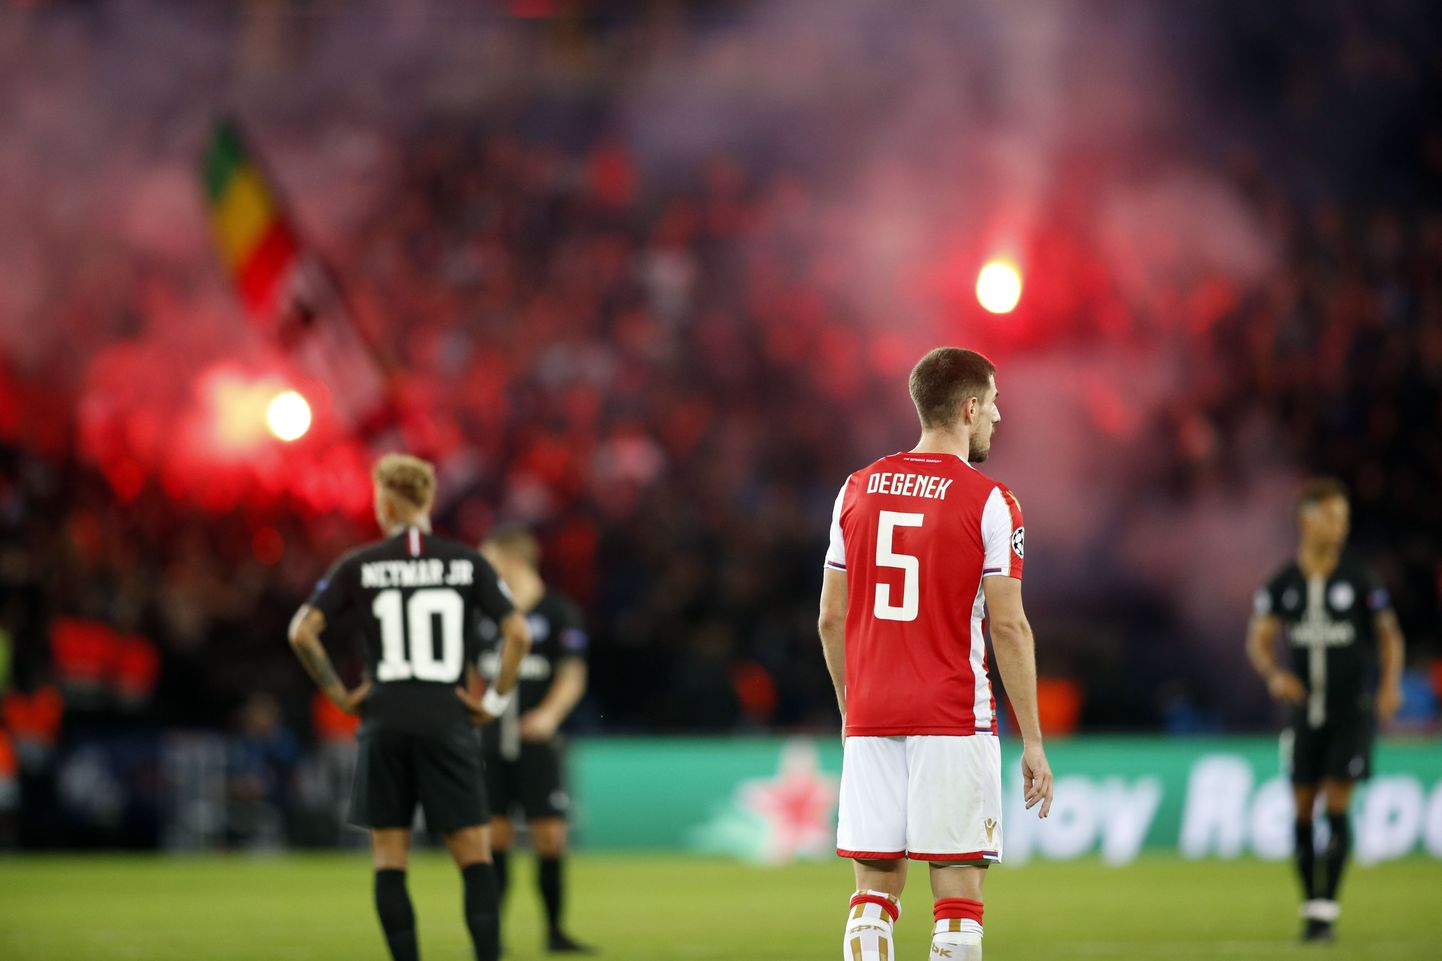 Flares are lit during during the UEFA Champions League Group C soccer match between Paris Saint Germain (PSG) and FC Red Star Belgrade at the Parc des Princes stadium in Paris, FRANCE - 03/10/2018.
//JEE_flares.12/Credit:J.E.E/SIPA/1810051909